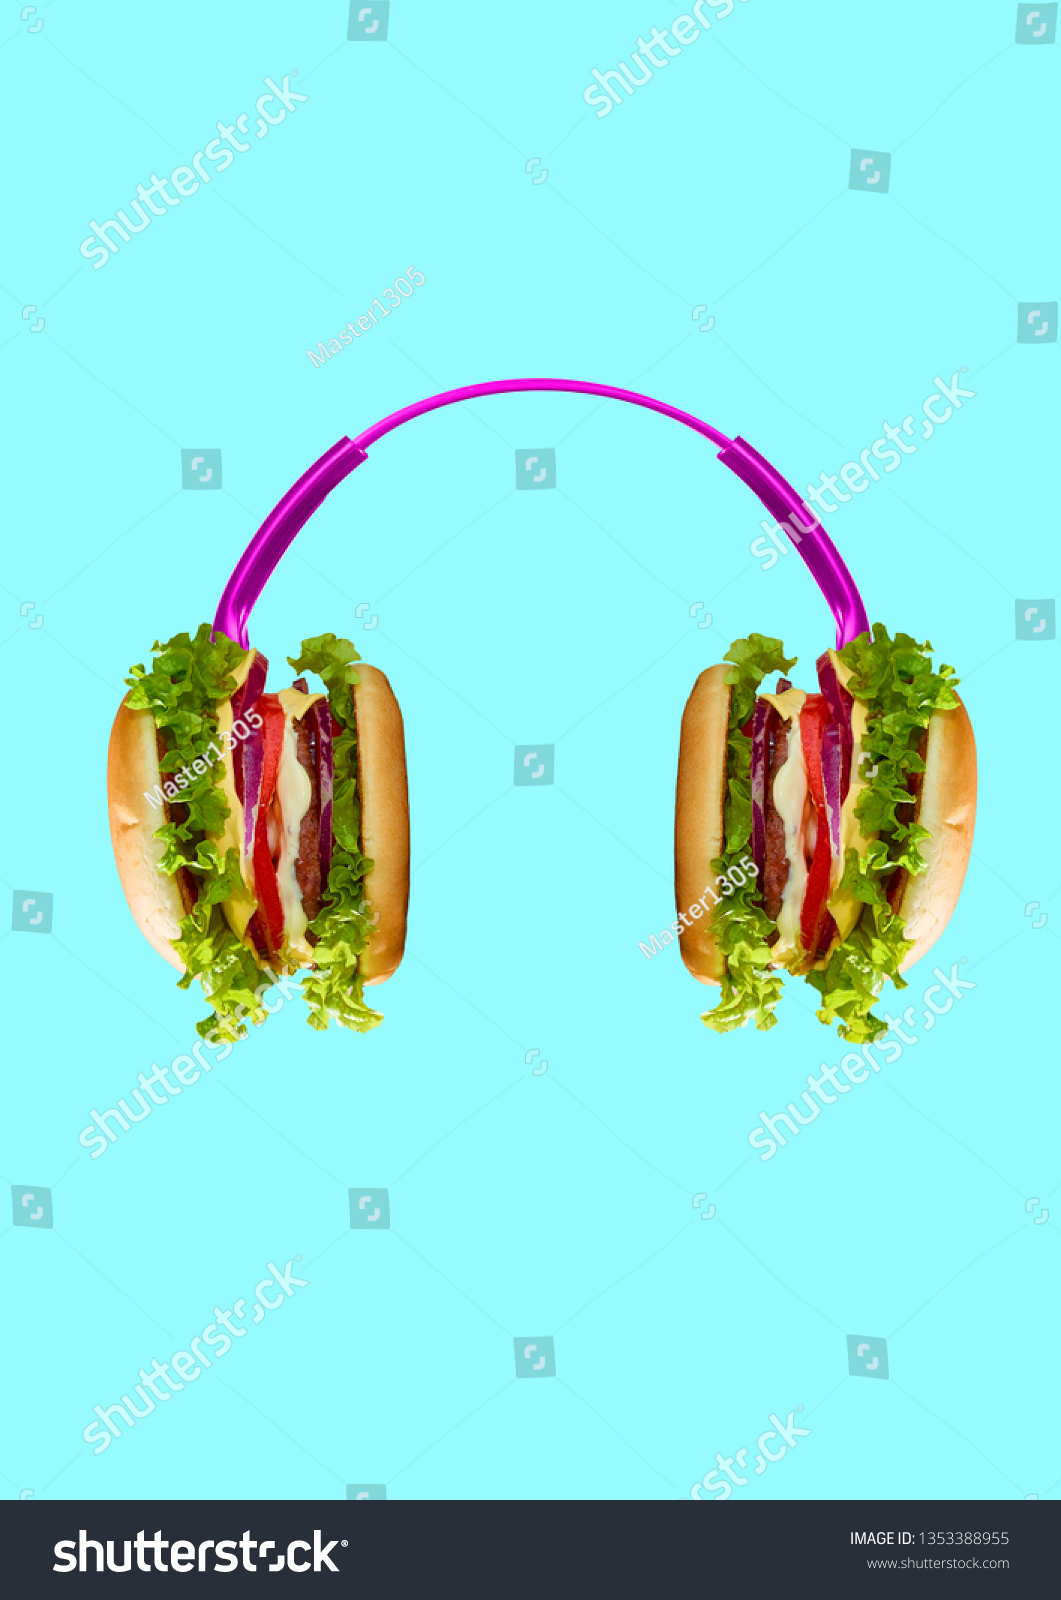 Music tastes so delicious. Pink headphones with burgers as a dynamics against light blue background. Modern art collage. Negative space. Contemporary pop design. Tasty food and juicy sound concept. #1353388955